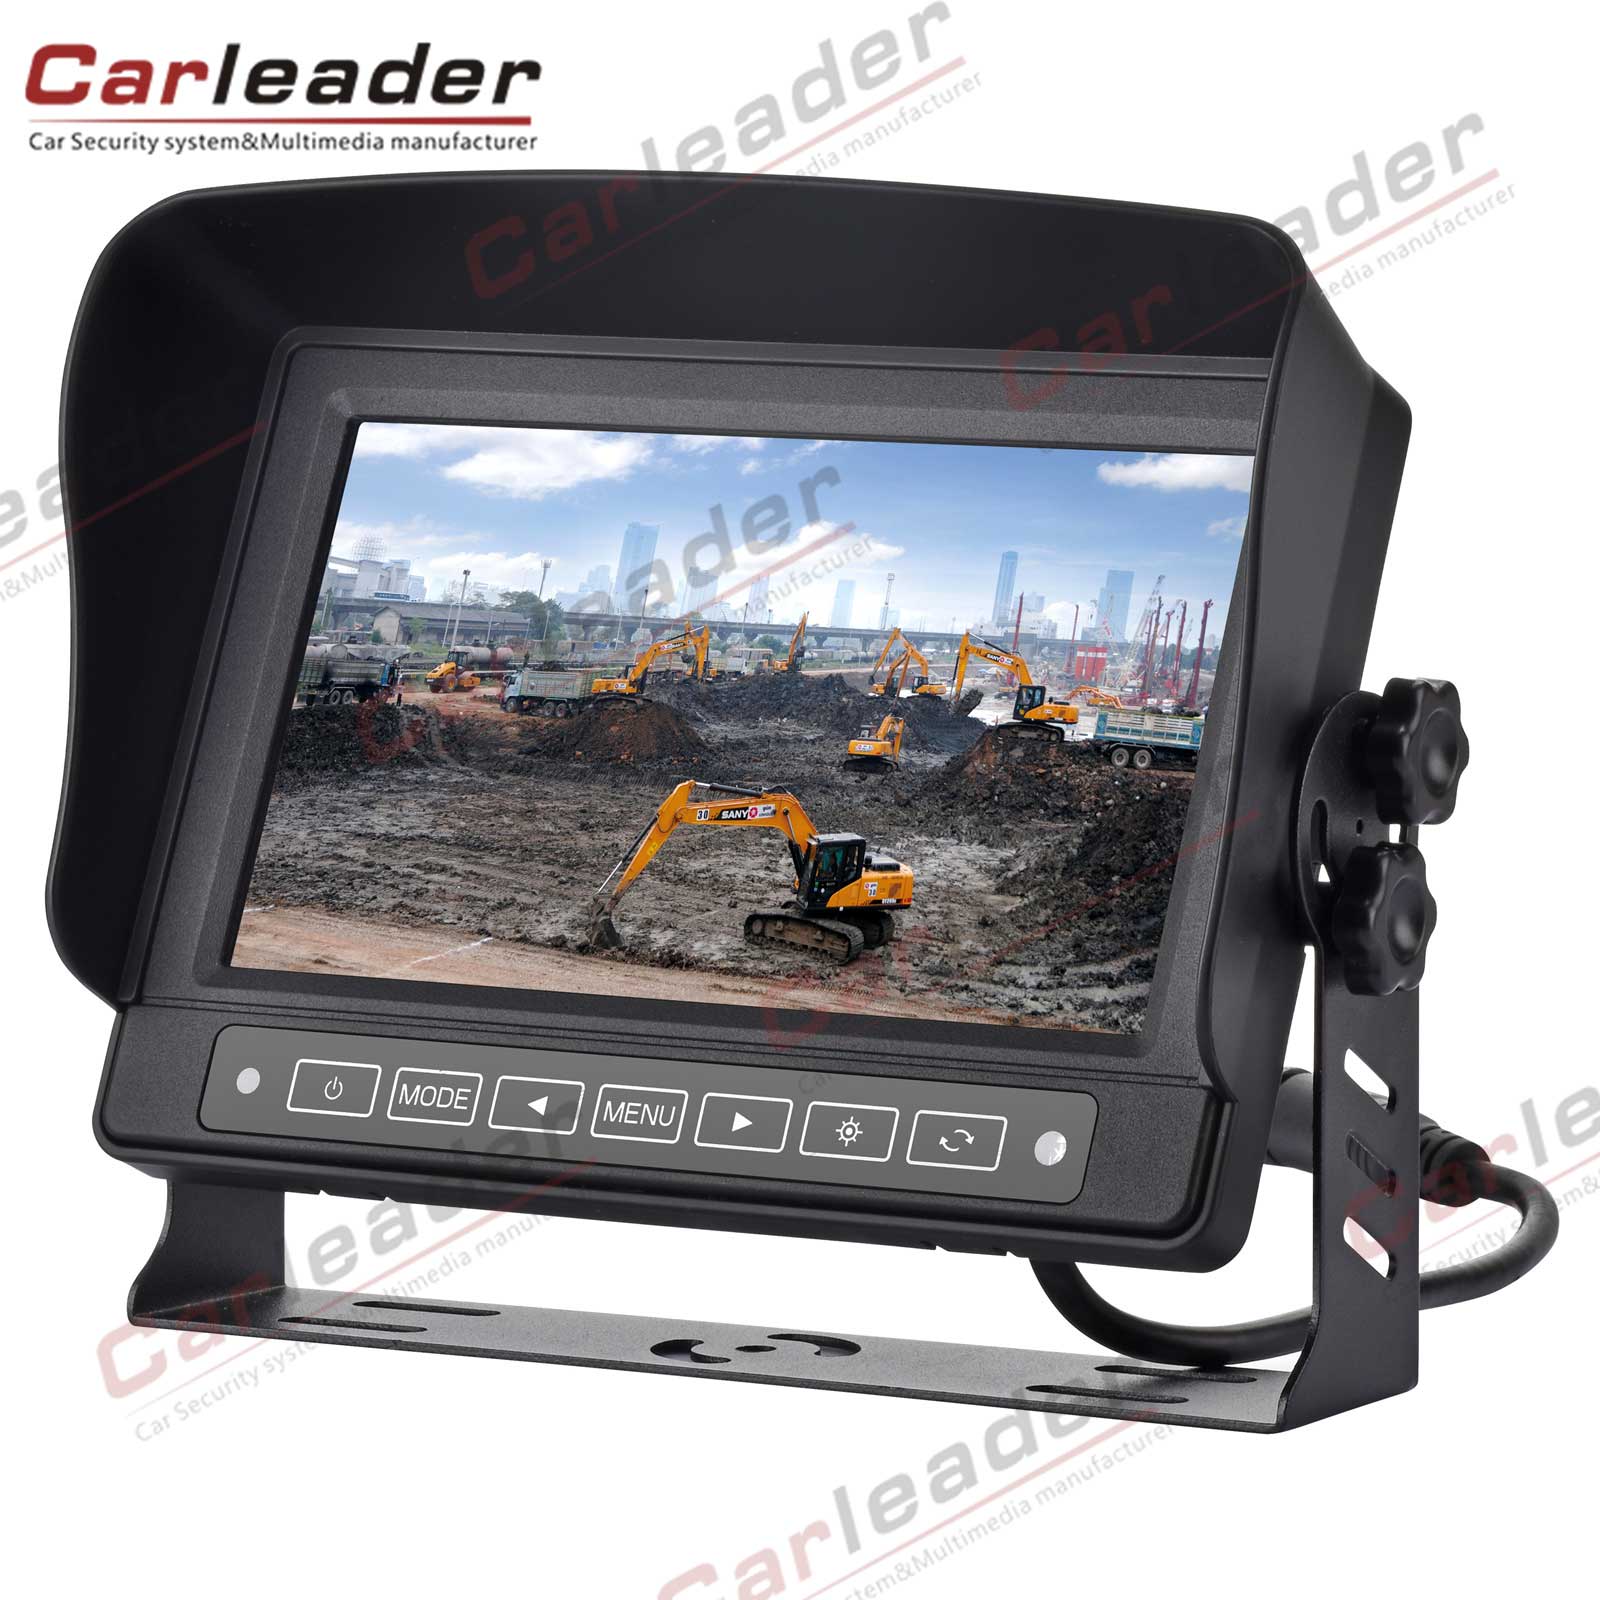 7 Inch Waterproof LCD Car Rear View Monitor Details